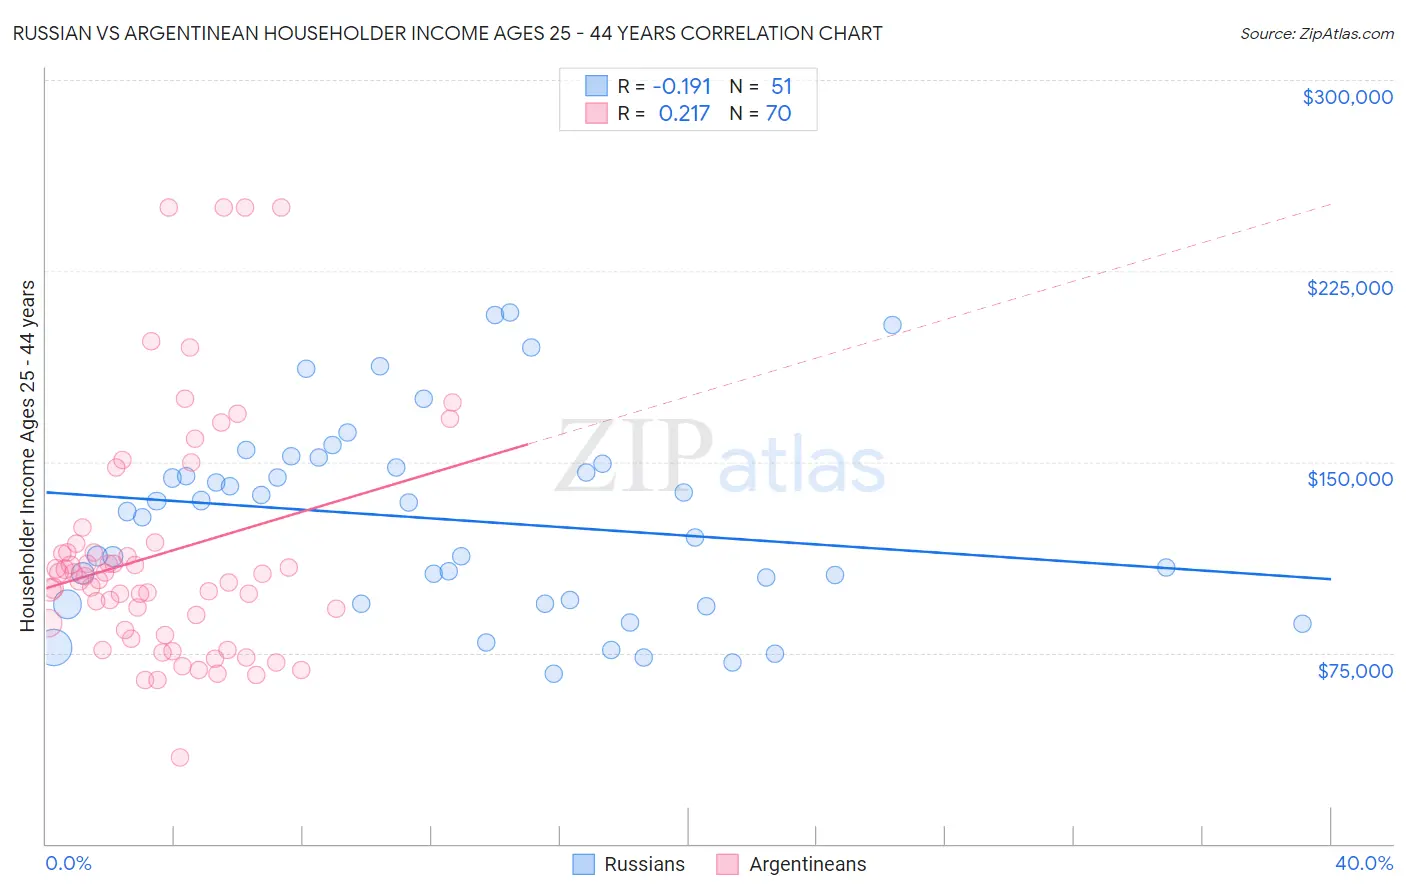 Russian vs Argentinean Householder Income Ages 25 - 44 years